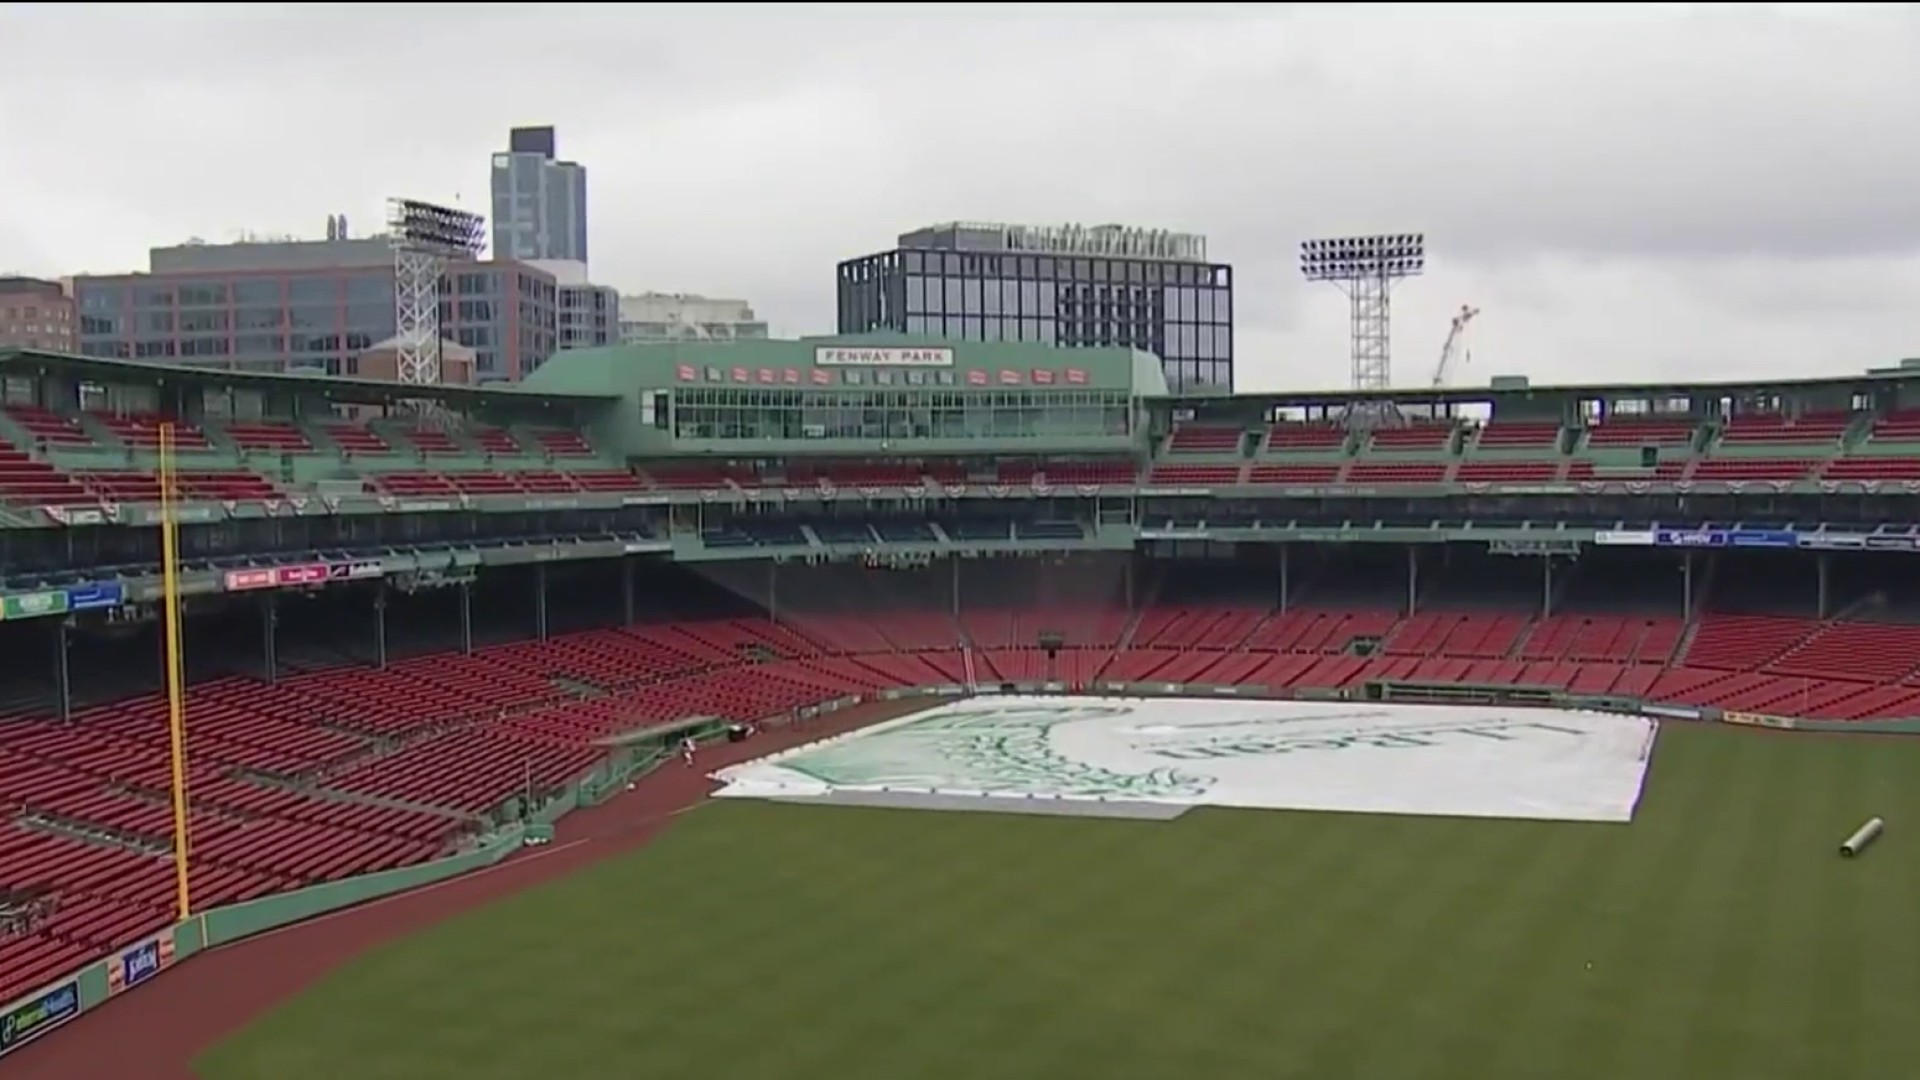 Red Sox Highlight Changes at Fenway Park Ahead of Opening Day – NBC Boston